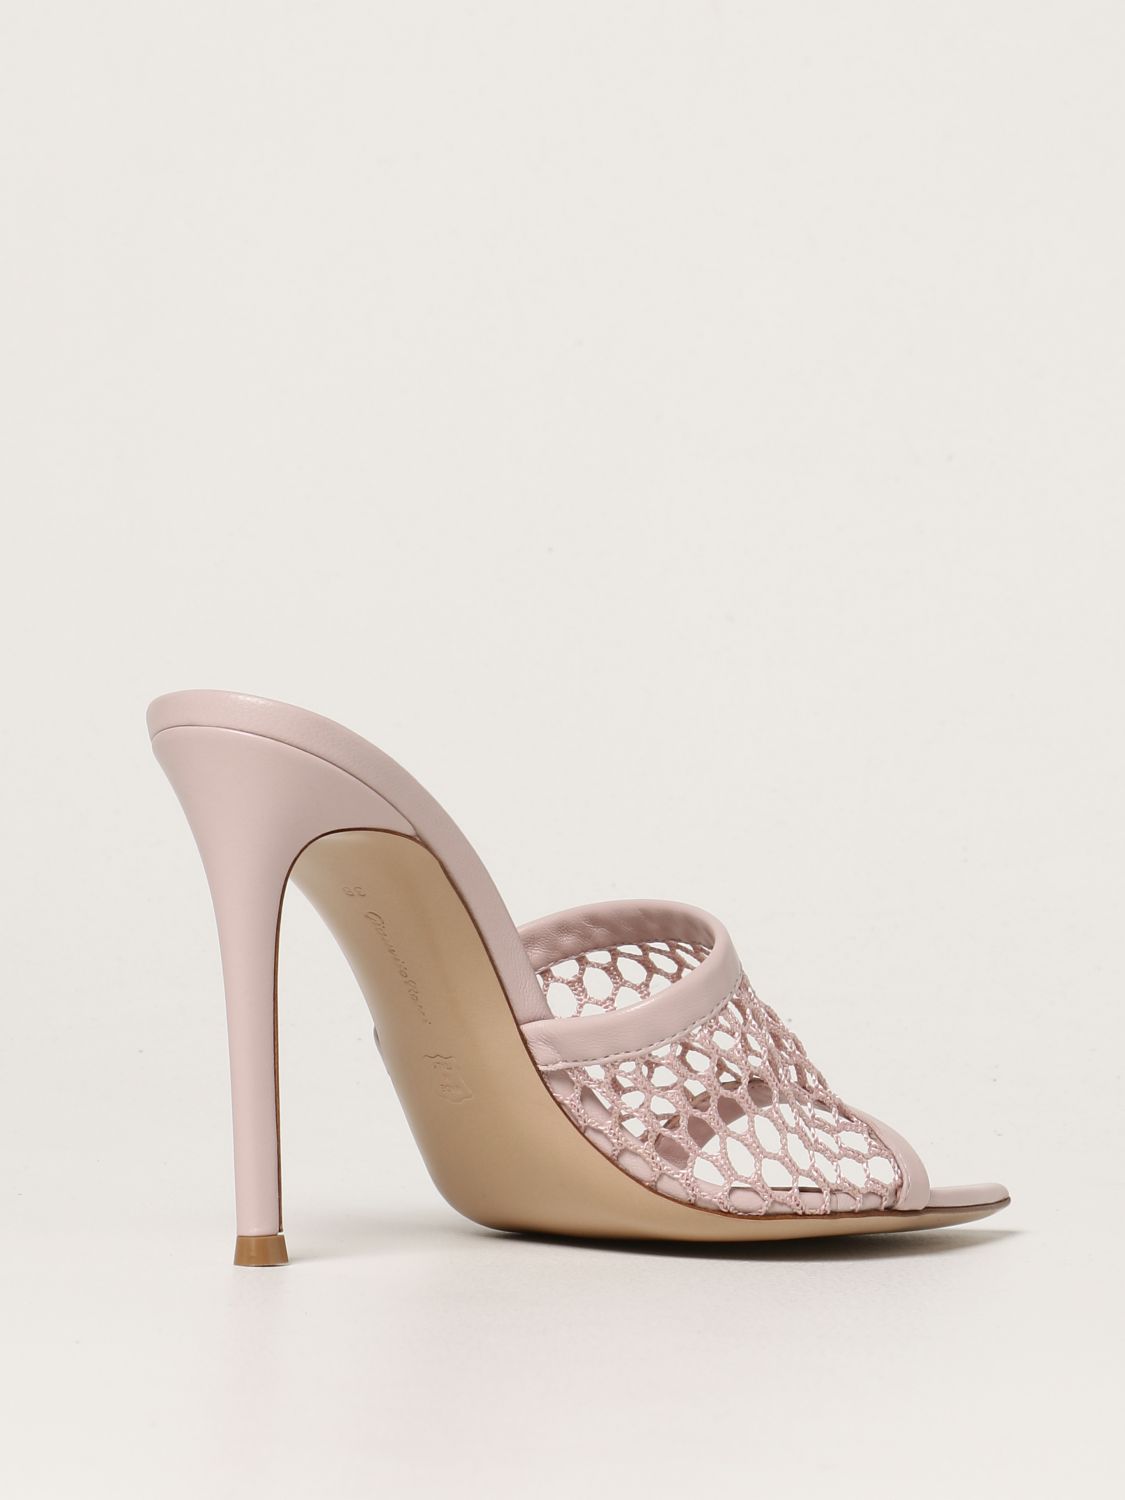 Sandales à talons Gianvito Rossi: Chaussures à talons femme Gianvito Rossi rose 3